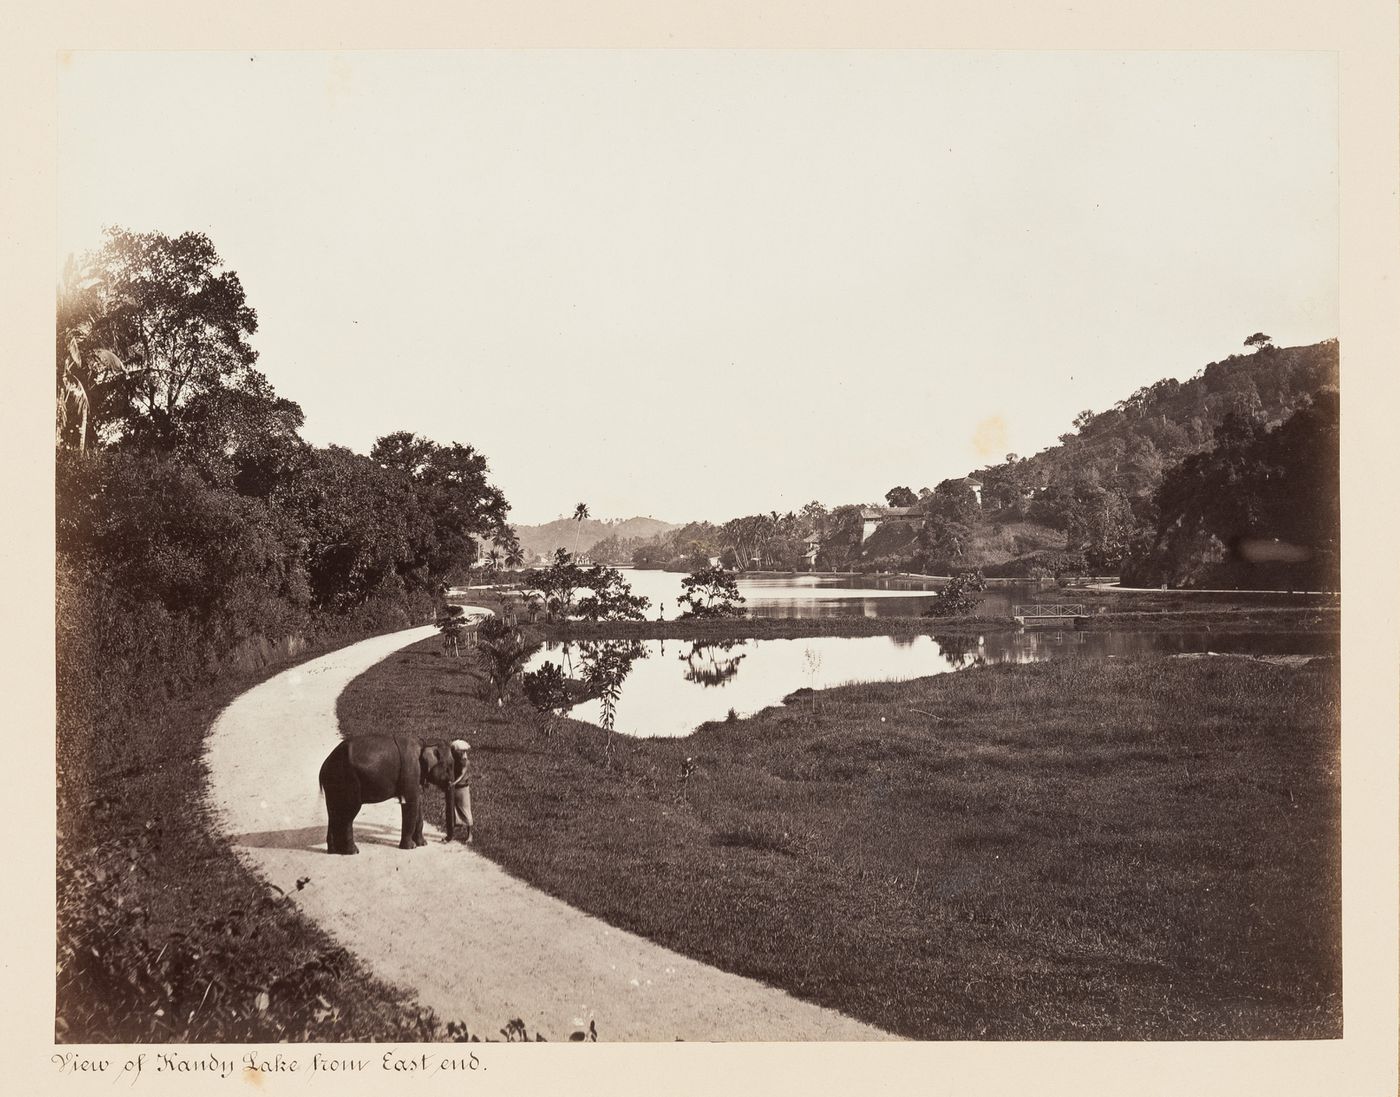 View of Kandy Lake from the east end with a man and an elephant on the left, Kandy, Ceylon (now Sri Lanka)